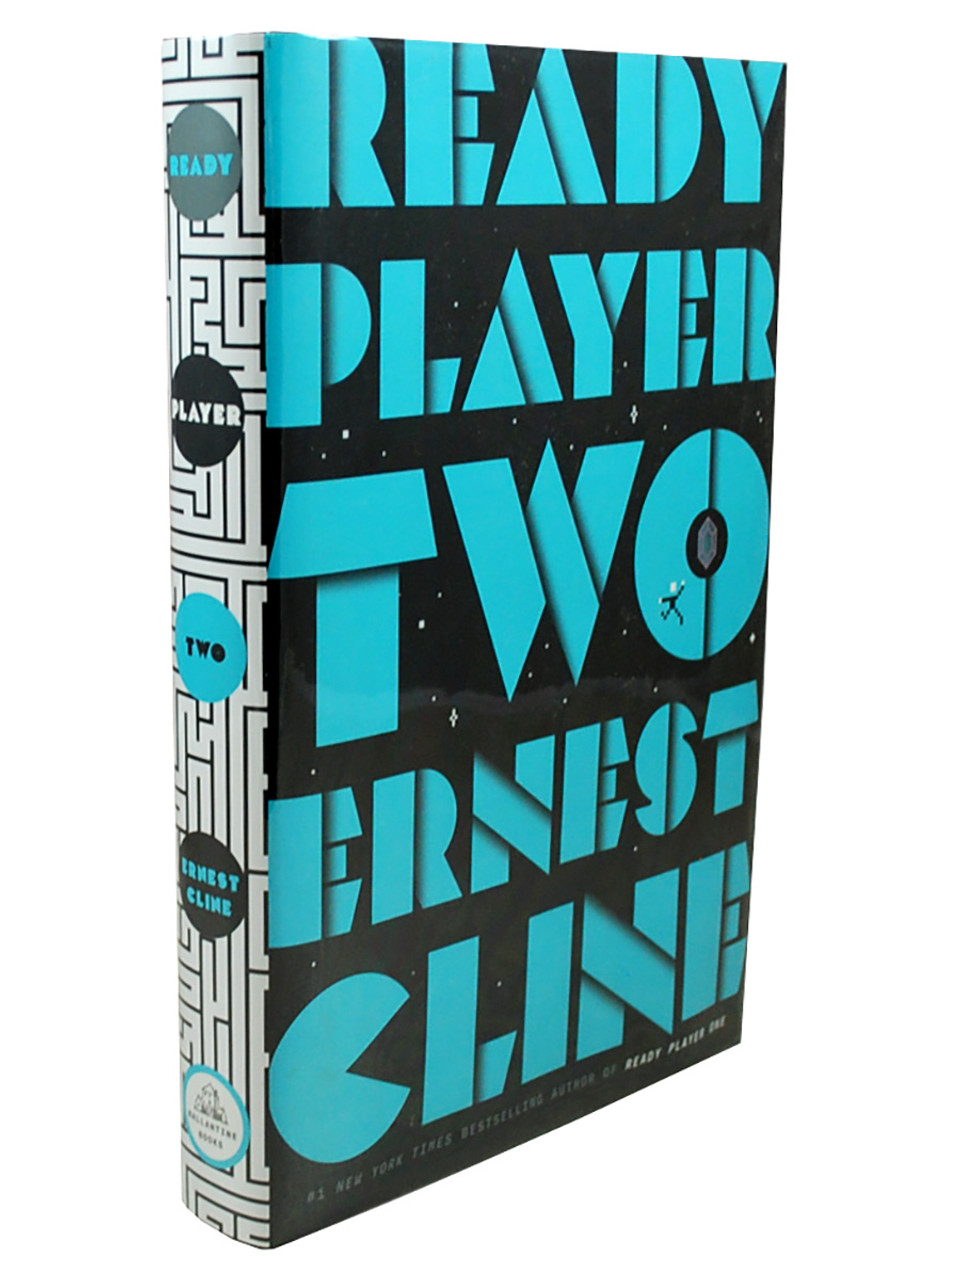 Ernest Cline "Ready Player One" + "Ready Player Two" Signed First Edition, First Printing, Slipcased 2-Vol. Box Set w/COA [Very Fine]